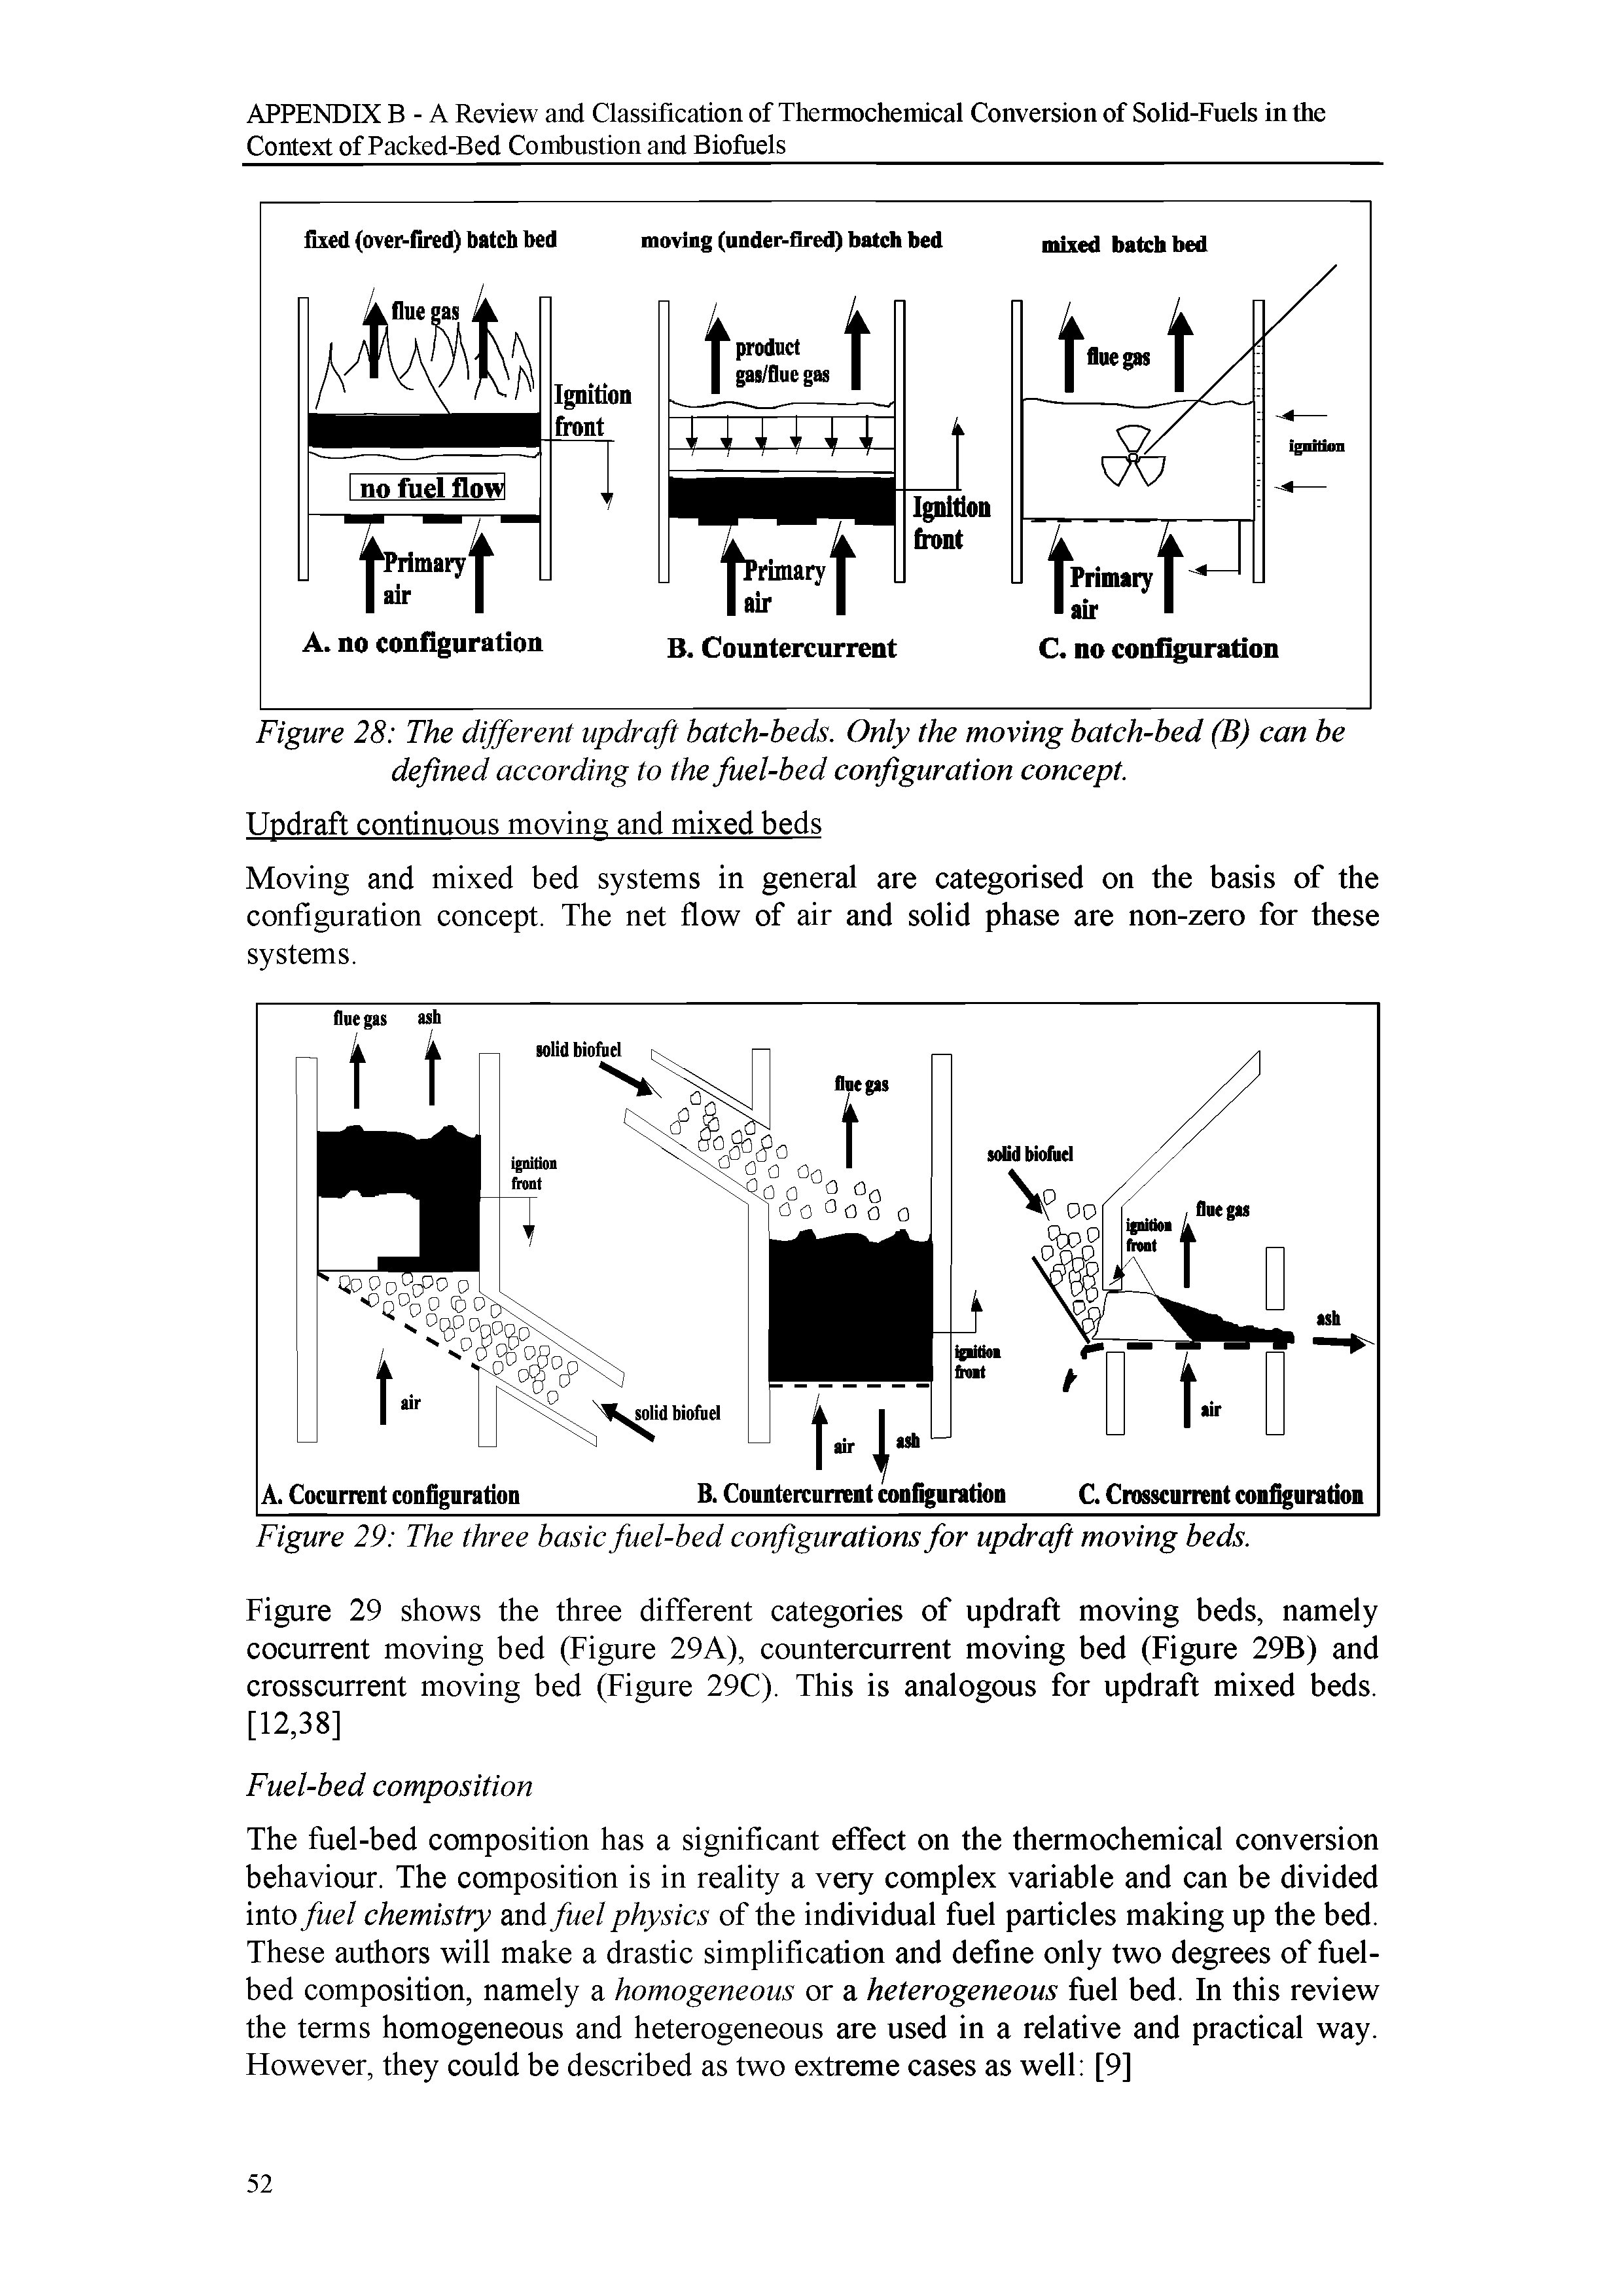 Figure 29 shows the three different categories of updraft moving beds, namely cocurrent moving bed (Figure 29A), countercurrent moving bed (Figure 29B) and crosscurrent moving bed (Figure 29C). This is analogous for updraft mixed beds. [12,38]...